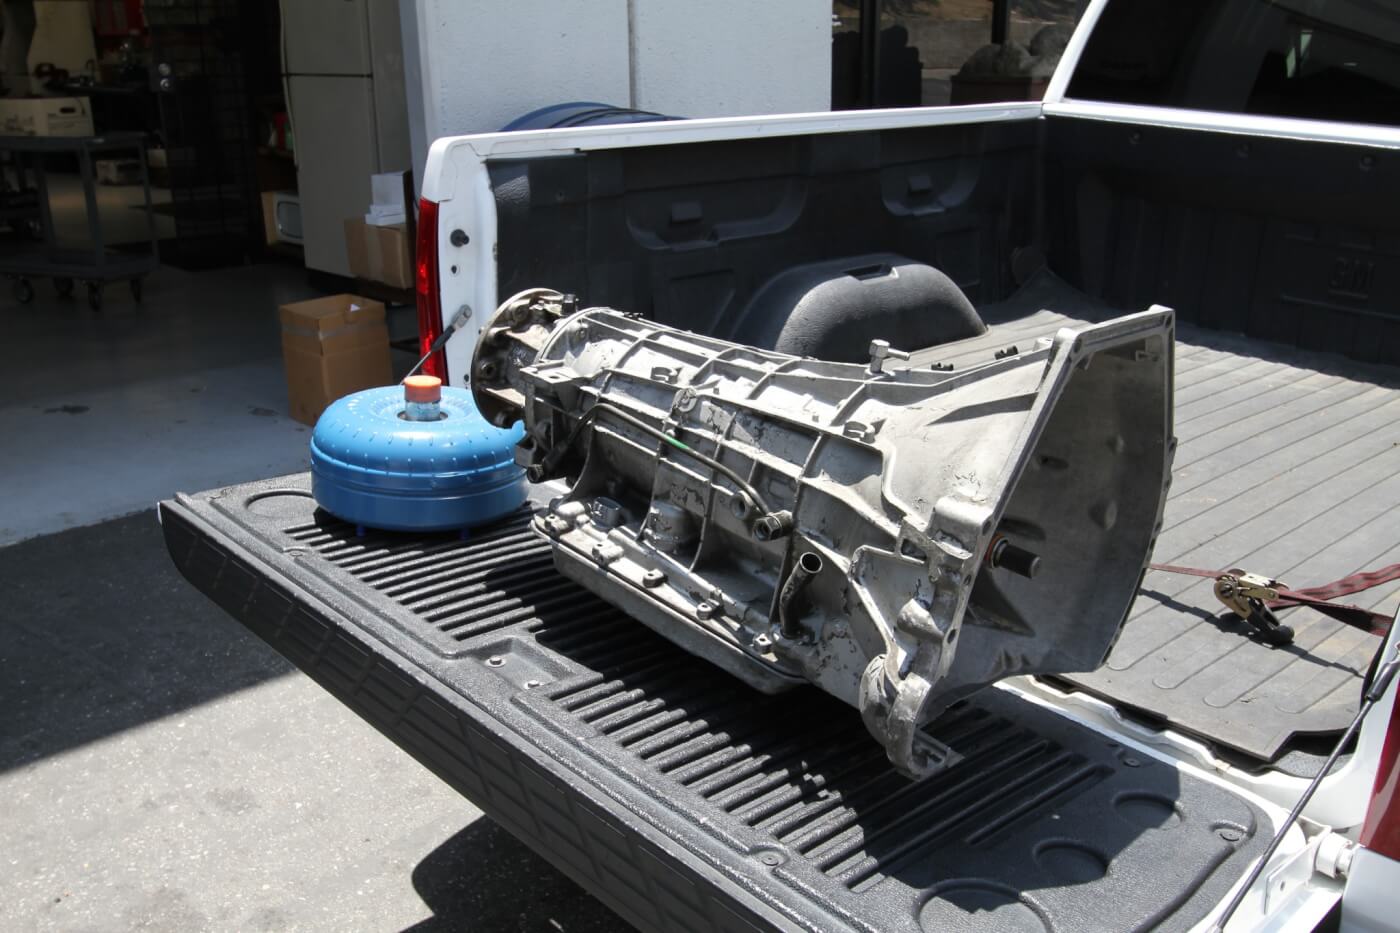 After a complete overhaul and some much needed upgrades by Remac, our better than new Ford 4R100 transmission is ready to install. Remac ships its transmission with a torque converter. 